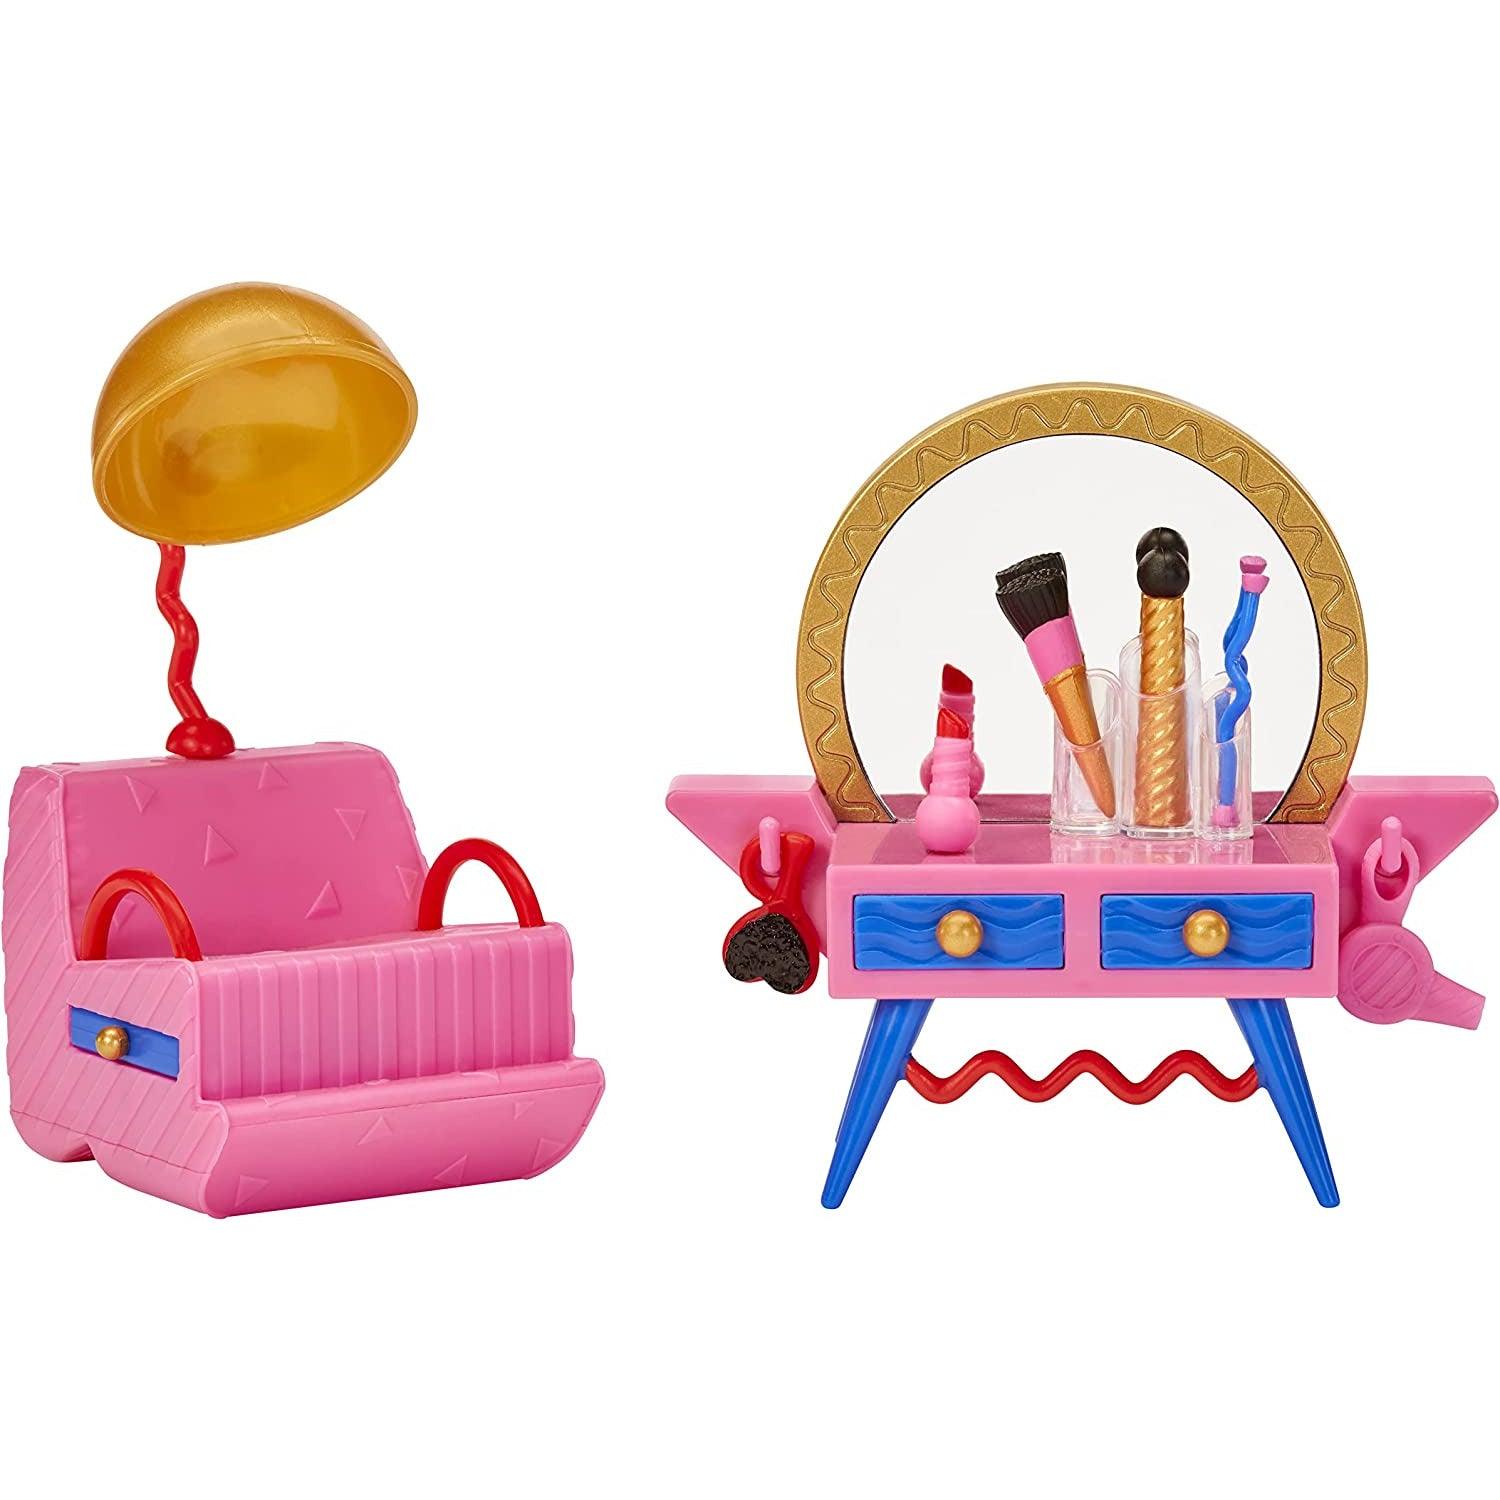 LOL Surprise OMG House of Surprises Beauty Booth Playset with Her Majesty Collectible Doll and 8 Surprises, Dollhouse Accessories - BumbleToys - 5-7 Years, Fashion Dolls & Accessories, Girls, L.O.L, LOL, Makeup, New Arrivals, Pink